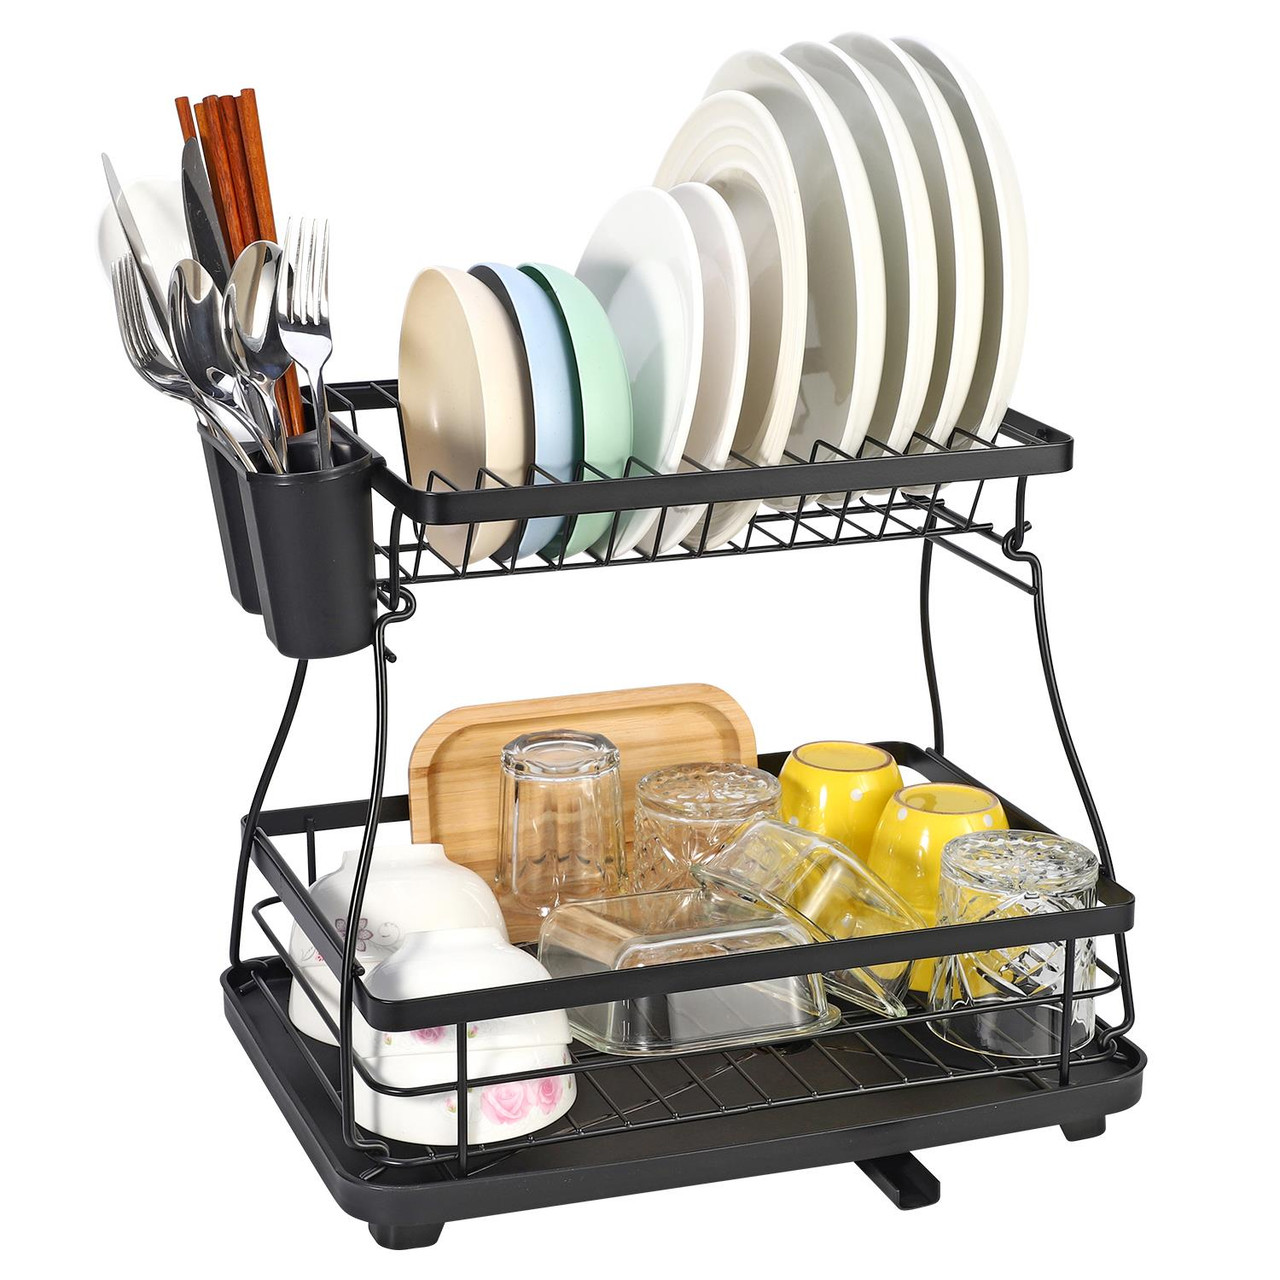 Durane Dish Drainer | 2 Tier Aluminium dish drying rack | Dish Drainer with  Detachable Plastic drip tray |Utensil and Cup Holder |Dish rack for